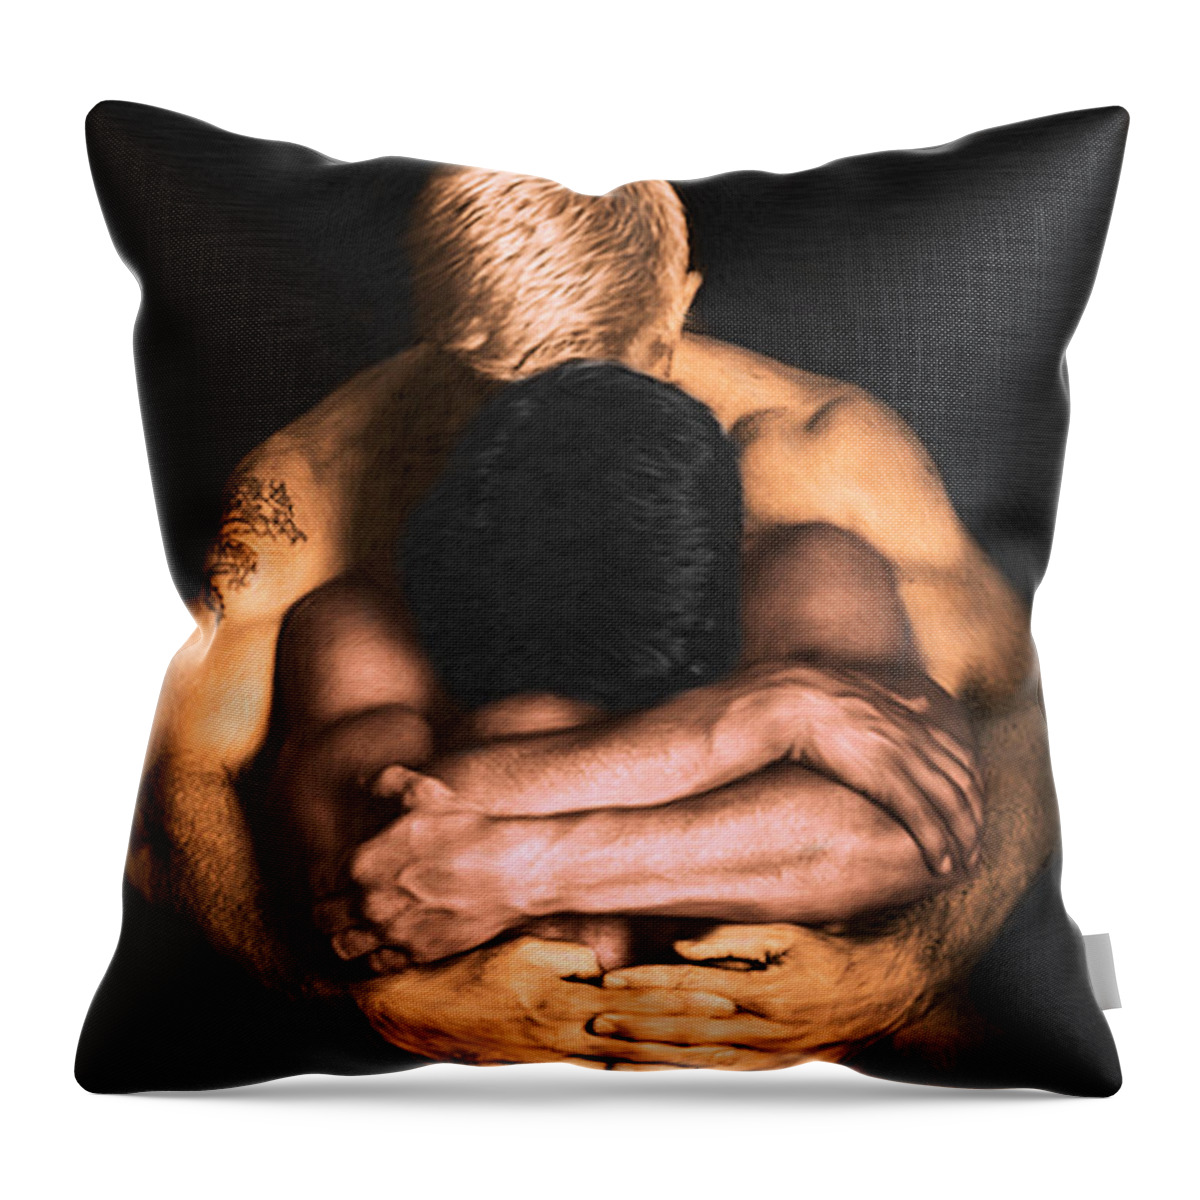 Clenched Throw Pillow featuring the painting Clenched by Troy Caperton